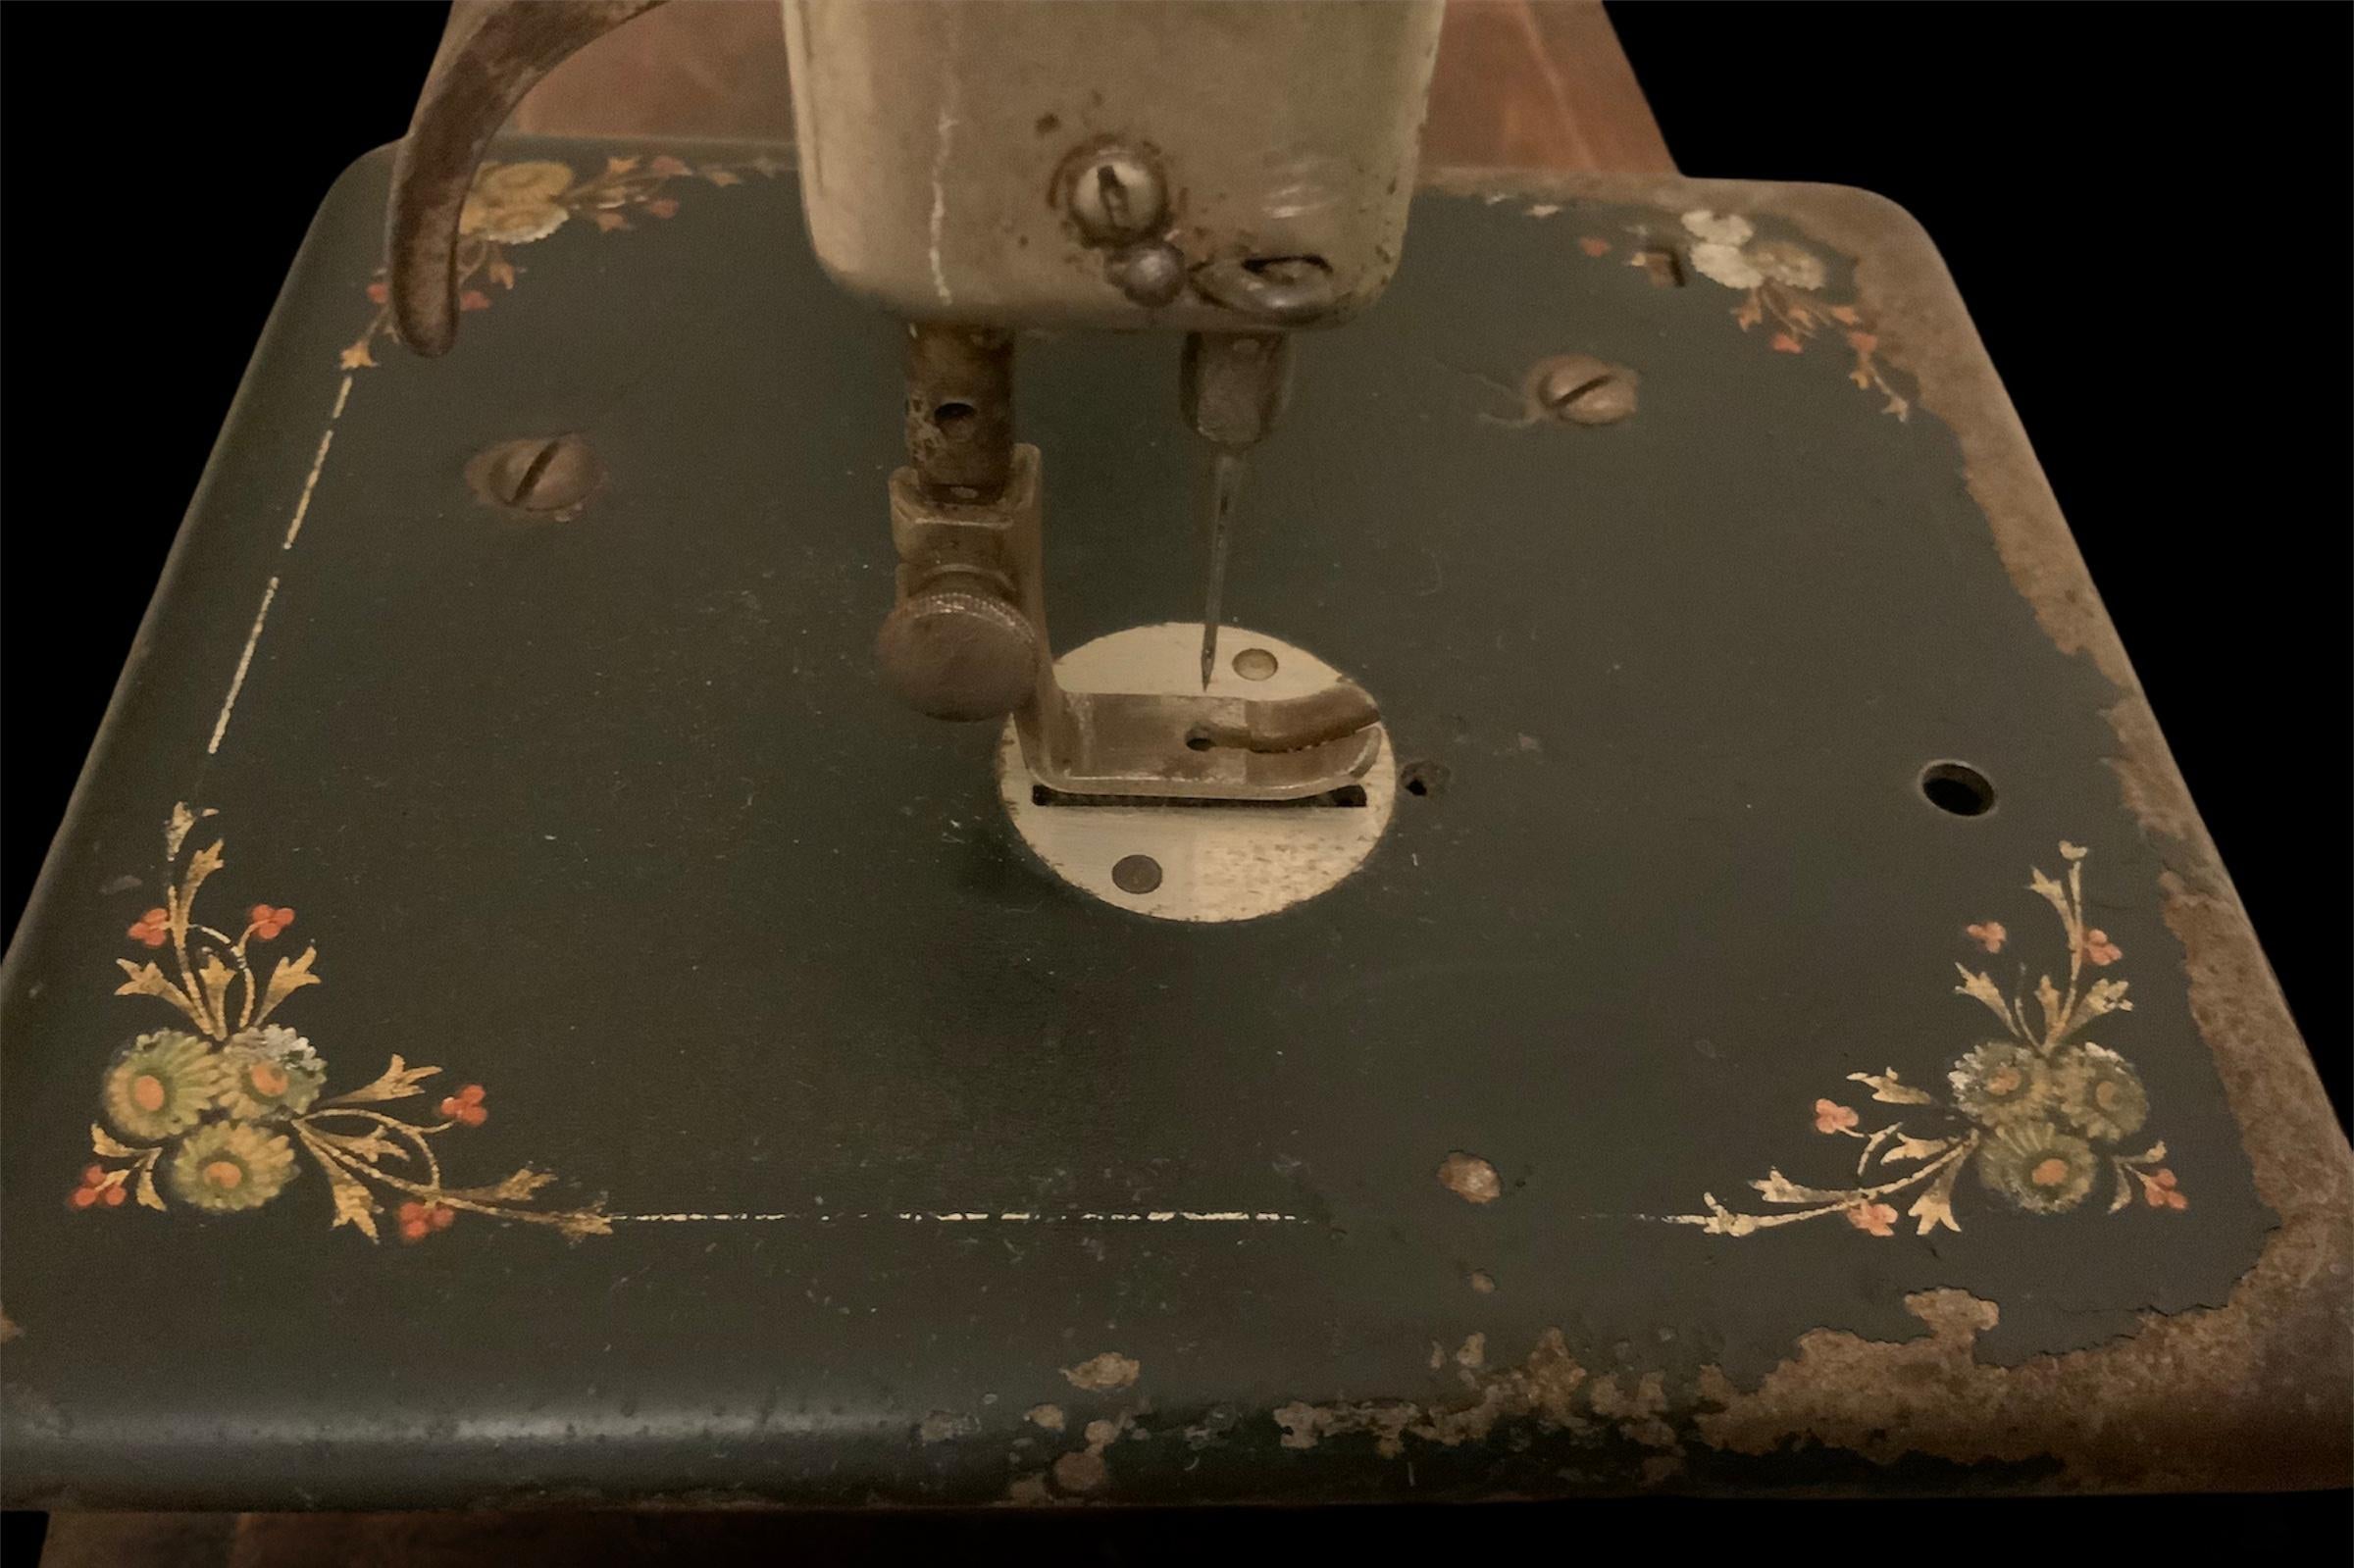 Portable Singer Manufacturing Co. Sewing Machine Model 24-61 2